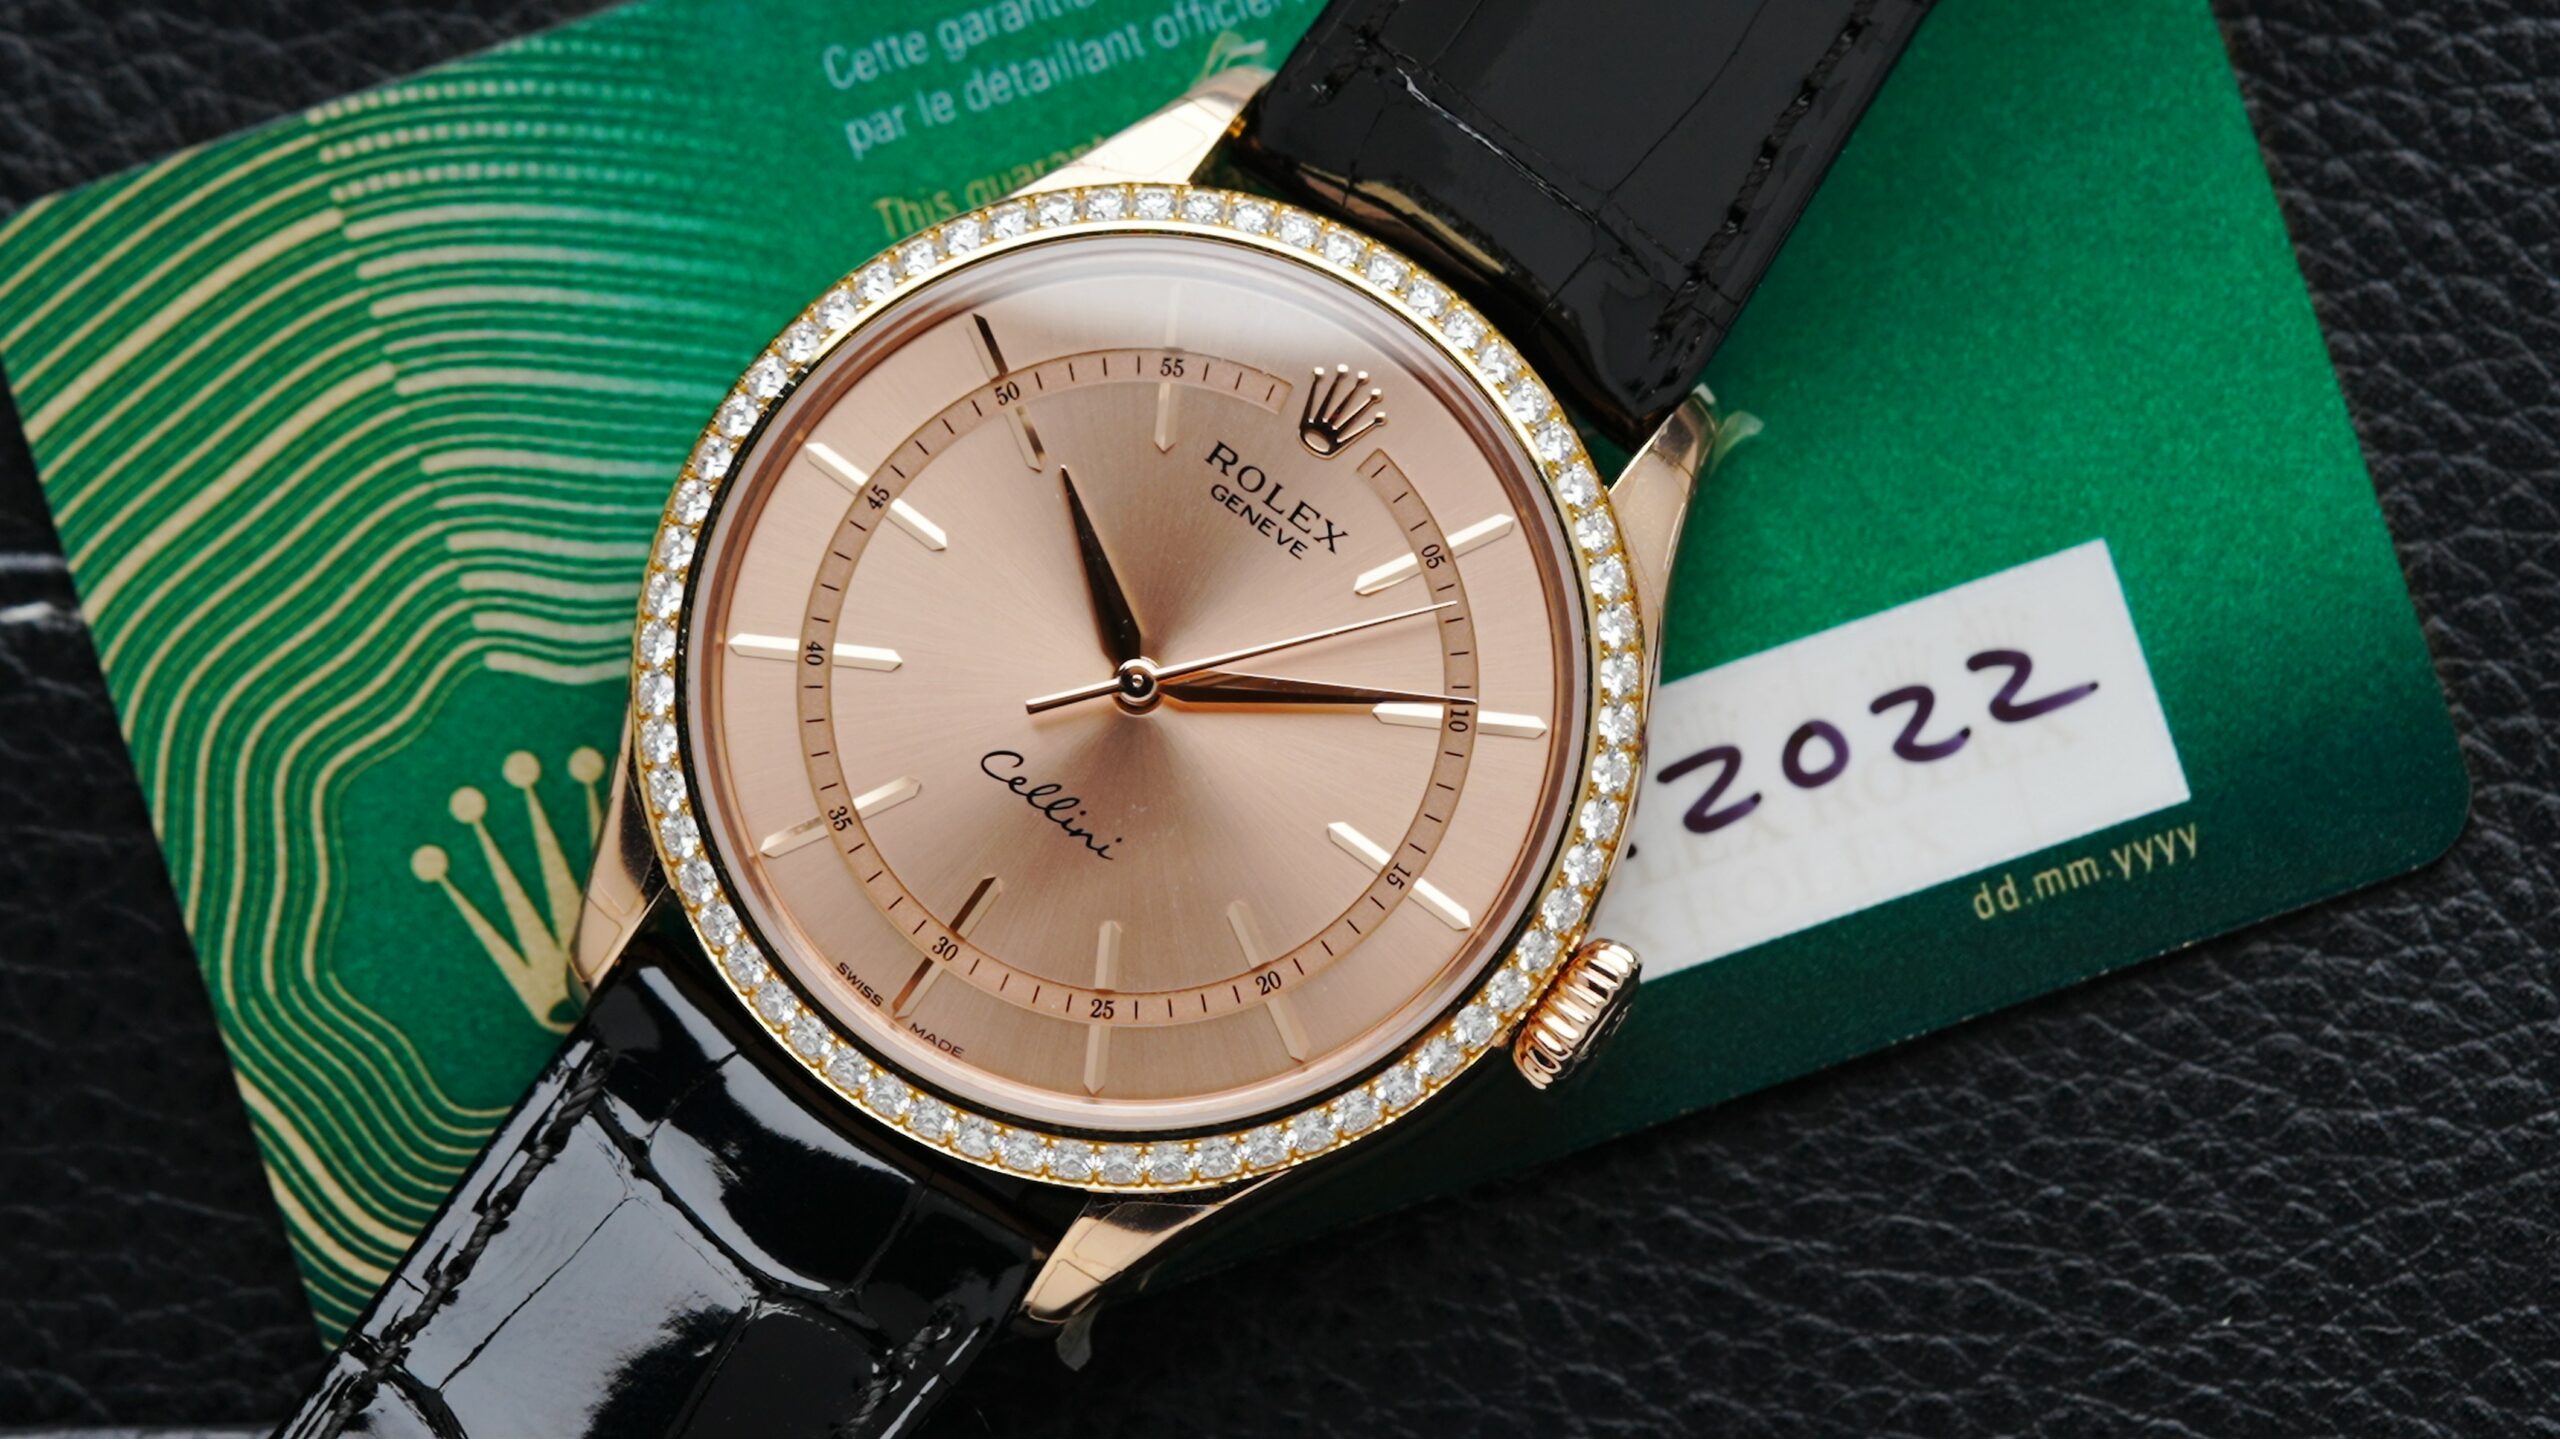 Rolex Cellini Time Salmon Rose Gold watch with card dated 2022.